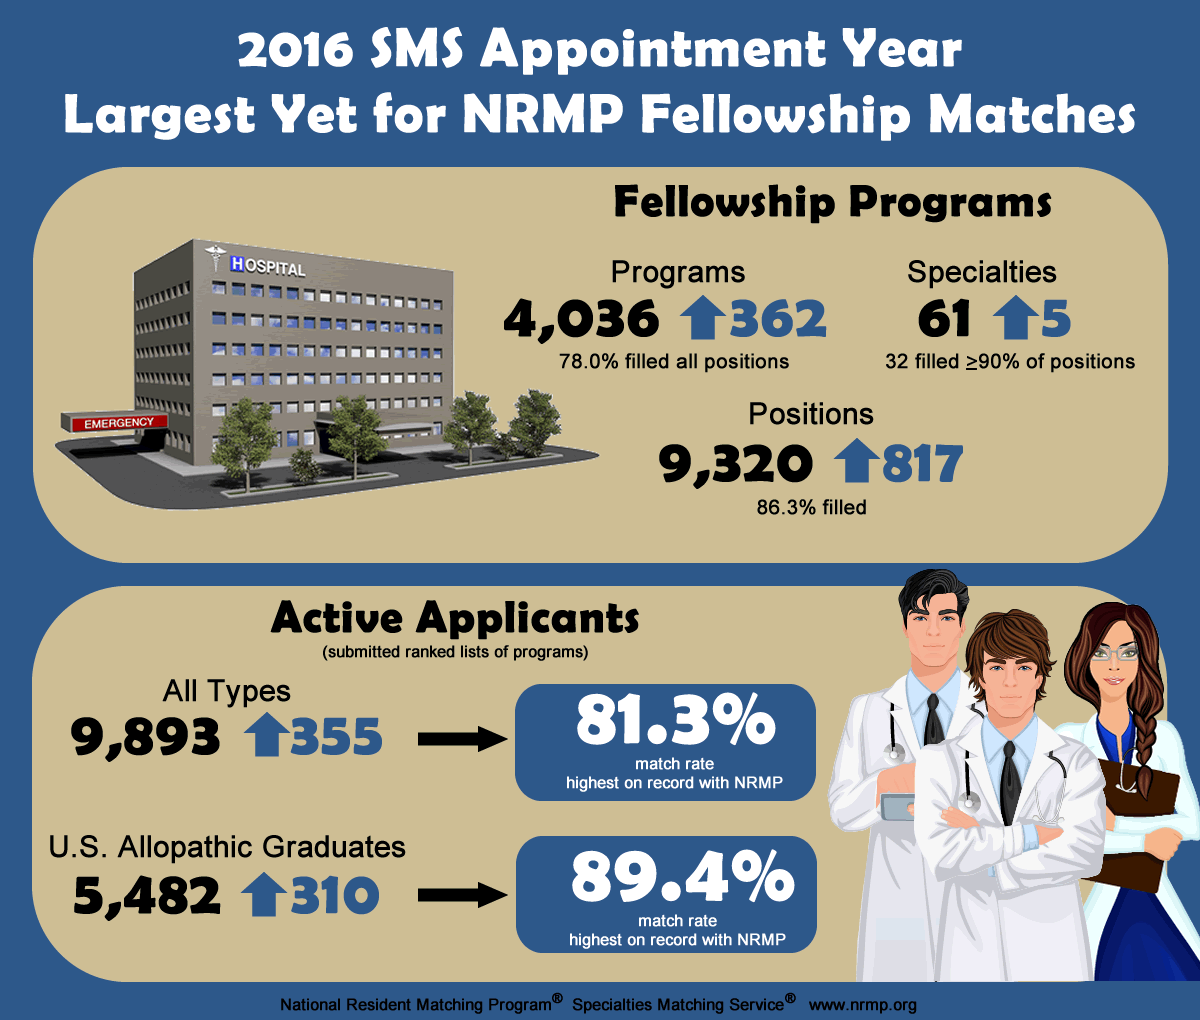 Report Released 2016 Appointment Year Largest Yet for NRMP Fellowship